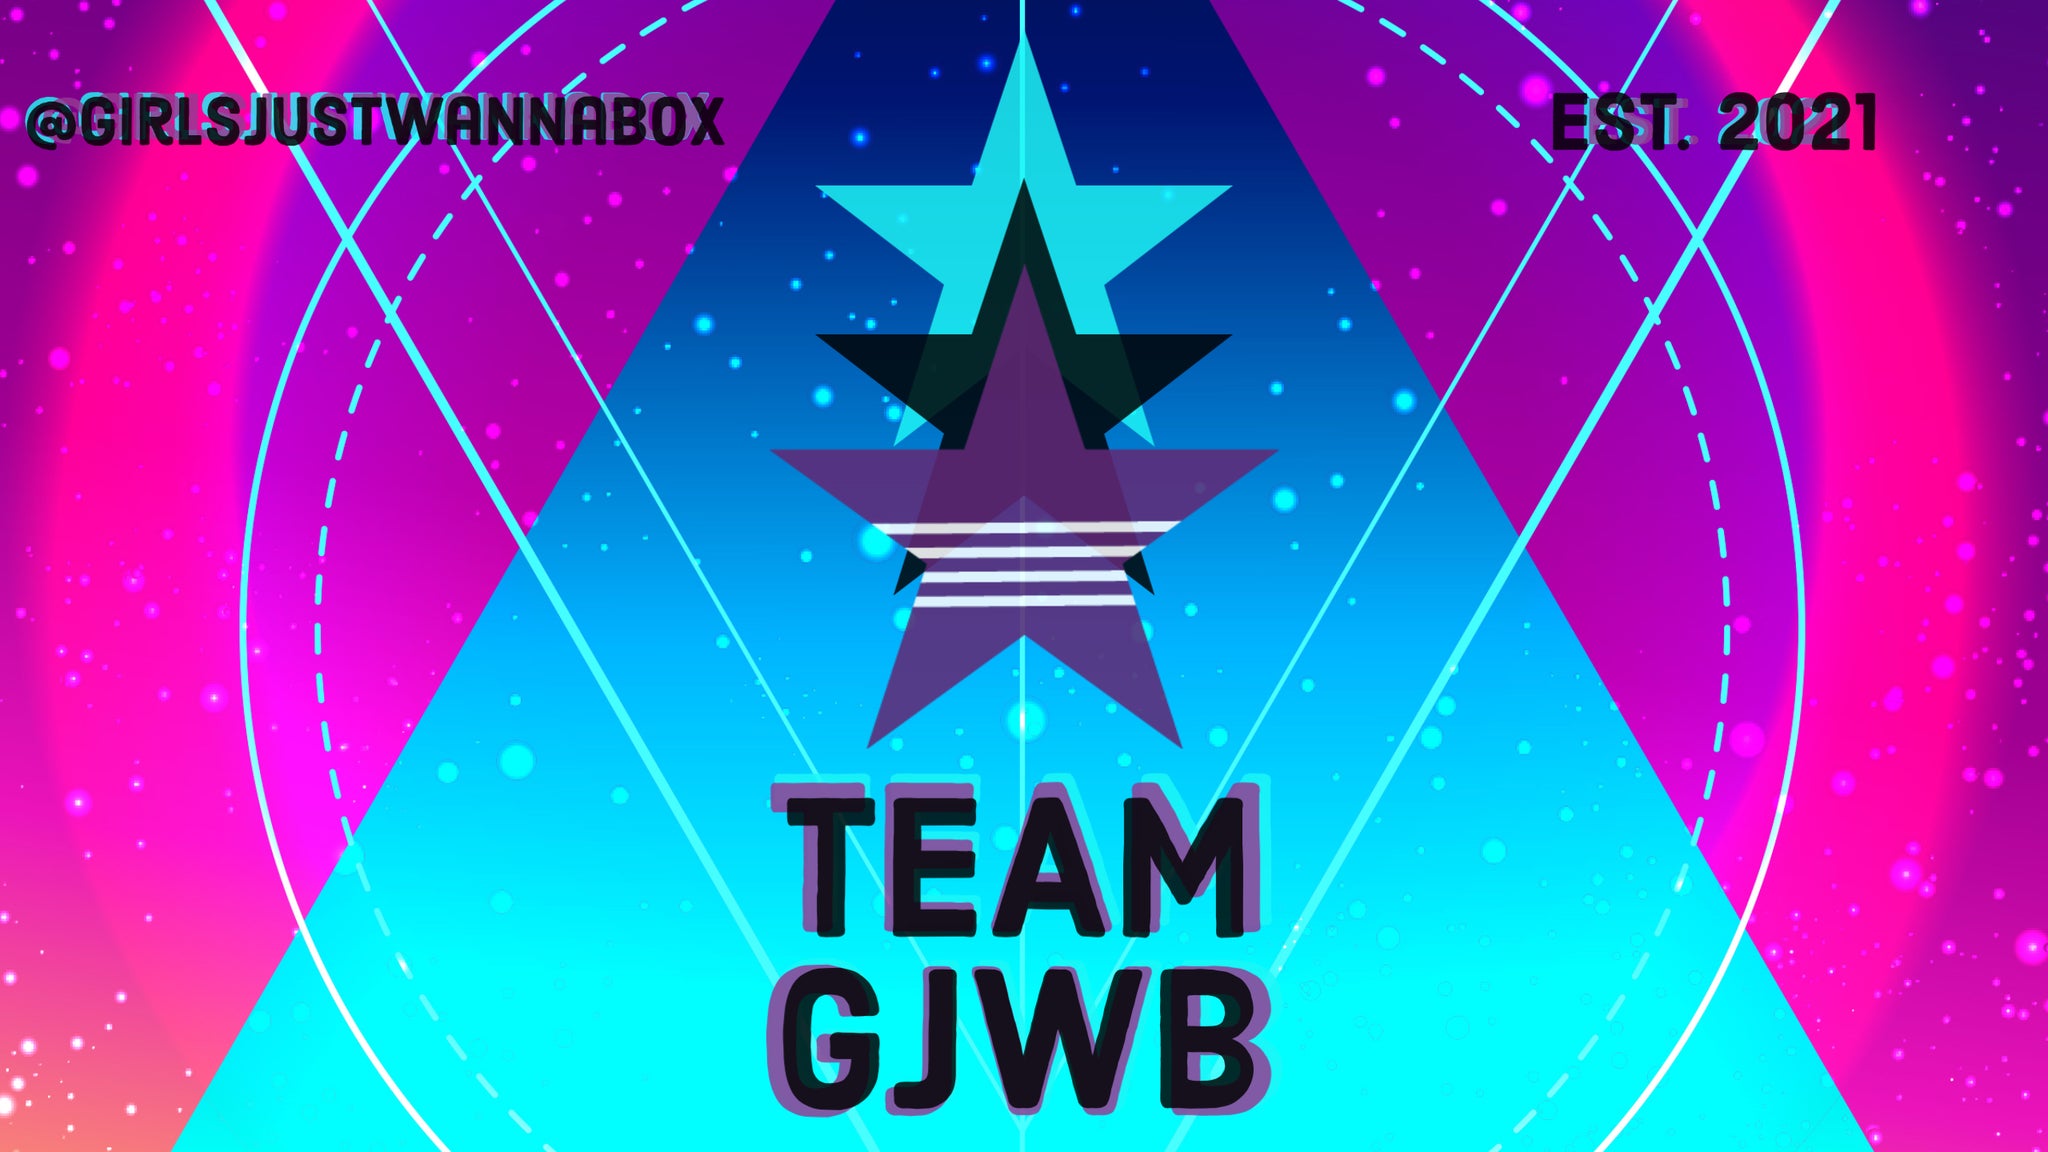 announcement of TEAM GJWB ambassadors with the star logo 